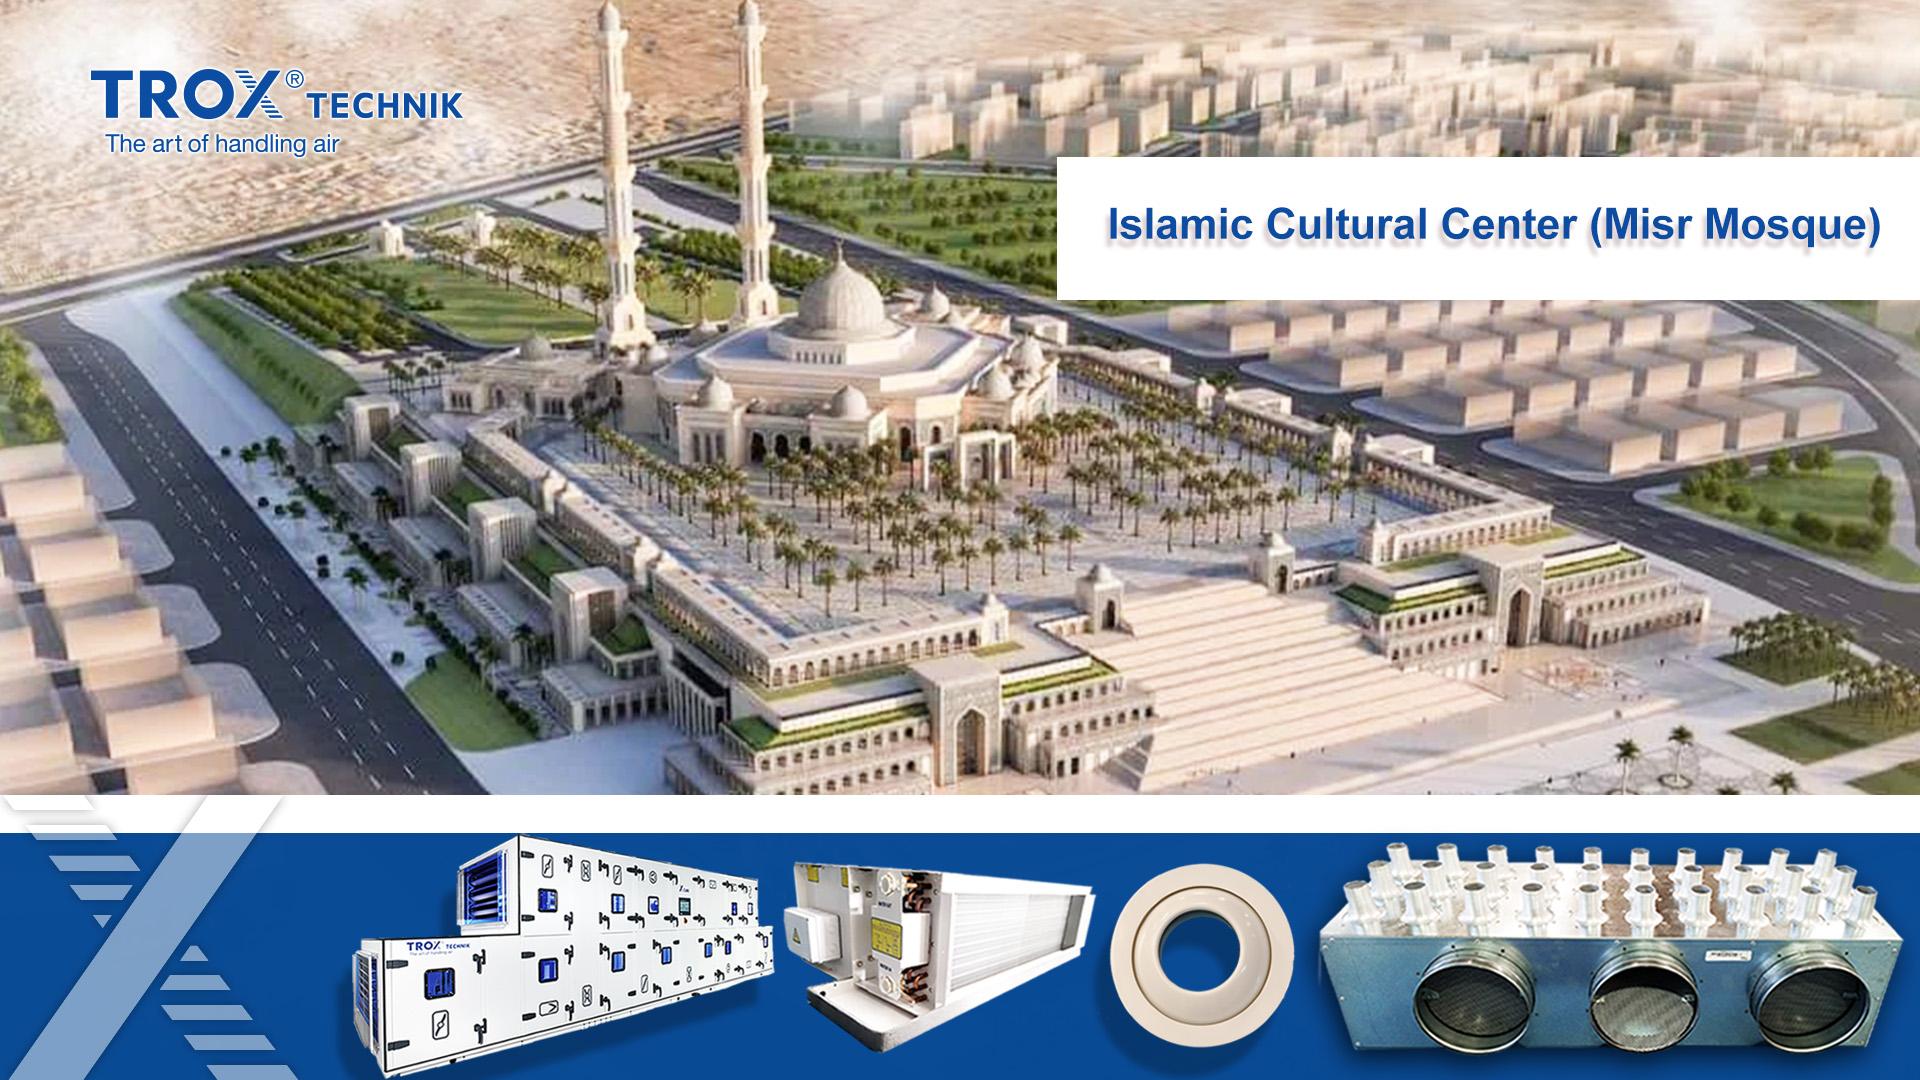 The Islamic Cultural Center (Misr Mosque)